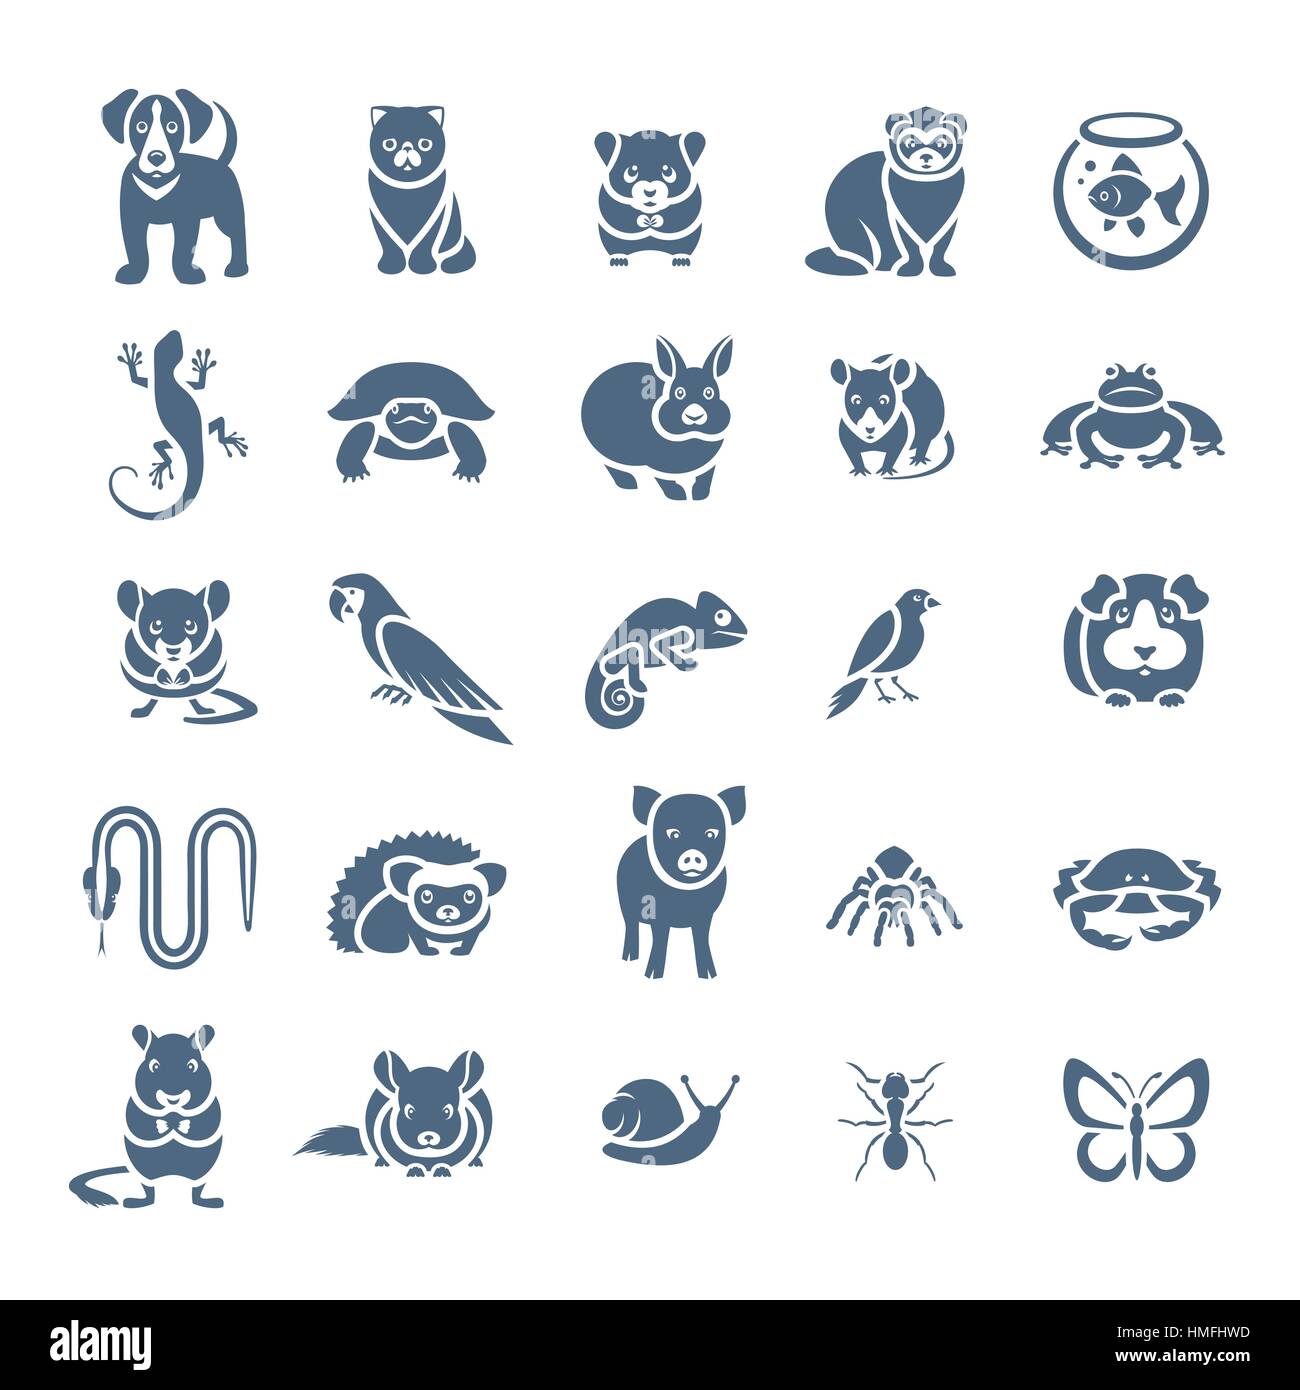 Animals pets vector flat silhouette icons set. Monochrome  pictograms of various domestic animals. Mammals, rodents, amphibian, insects, birds, reptil Stock Vector